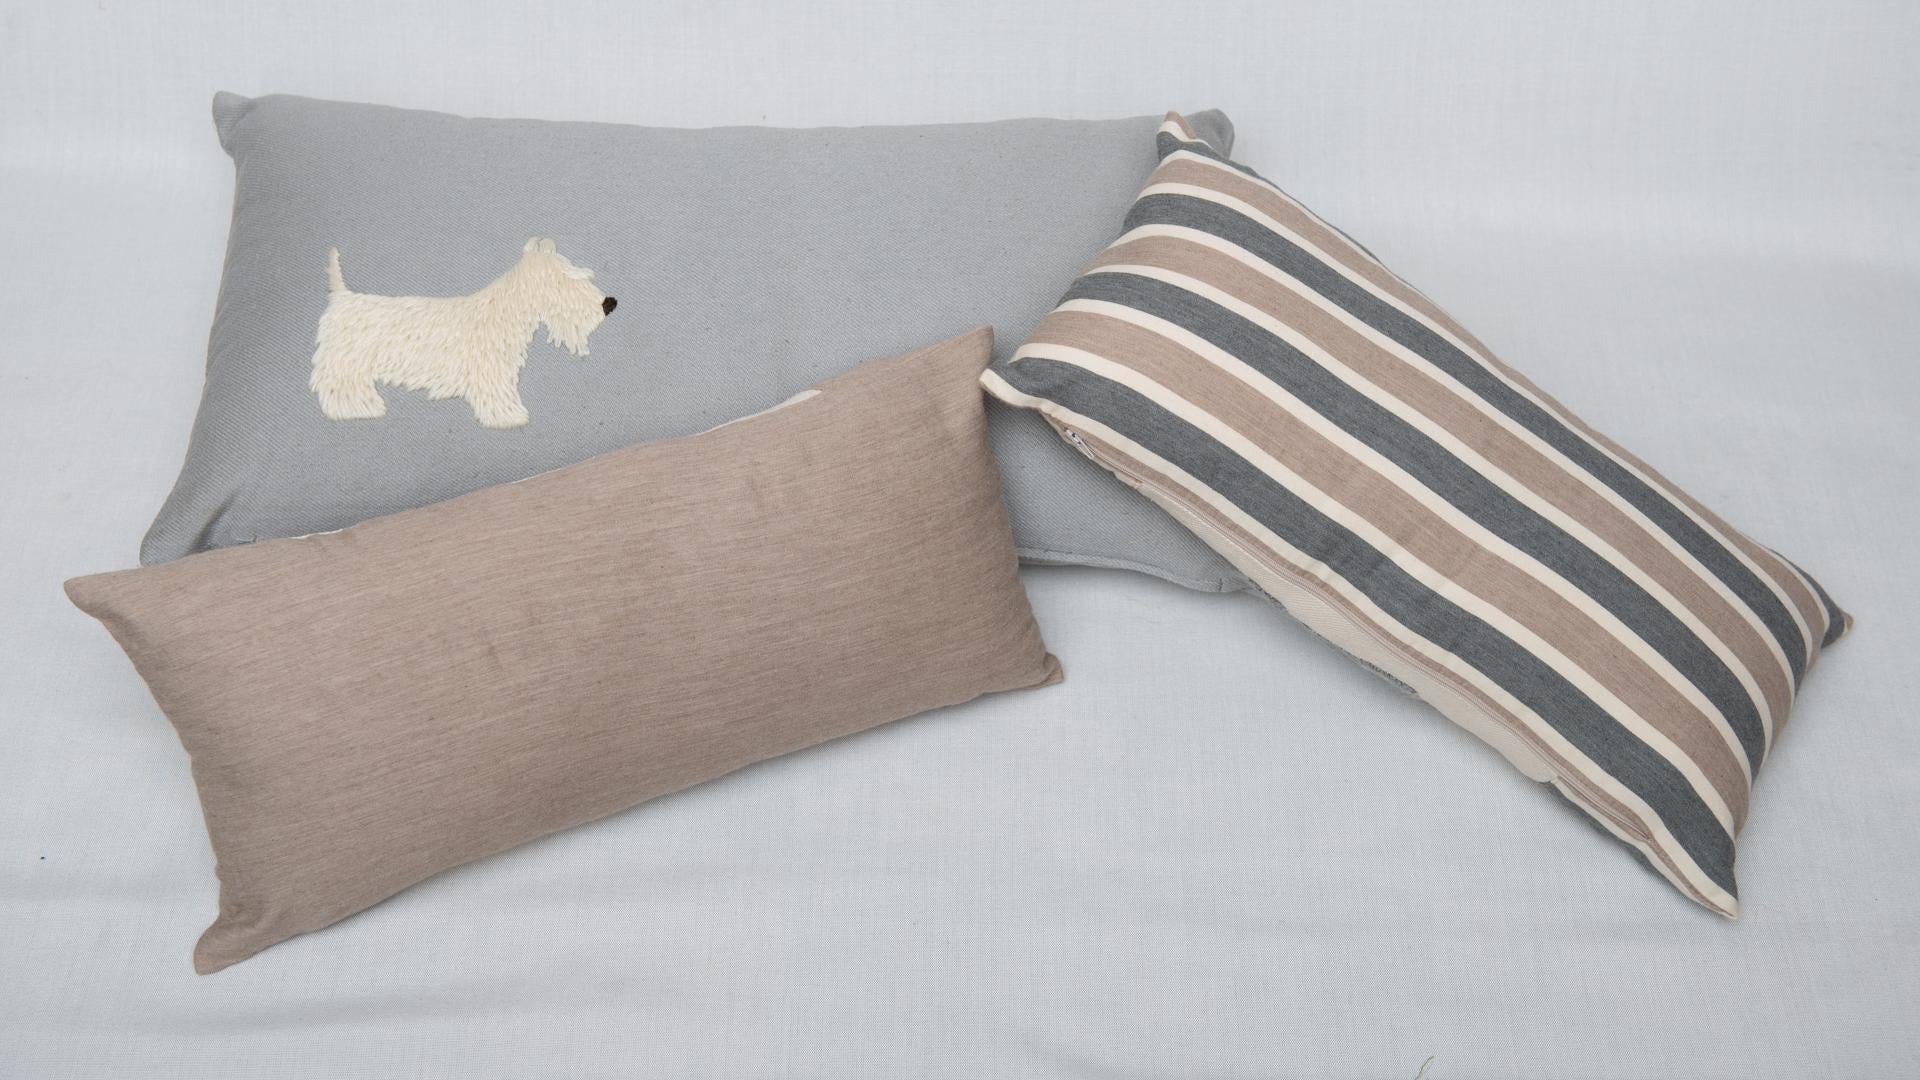 Other Three Pillows in Cachemire Fabric with a Little Dog For Sale